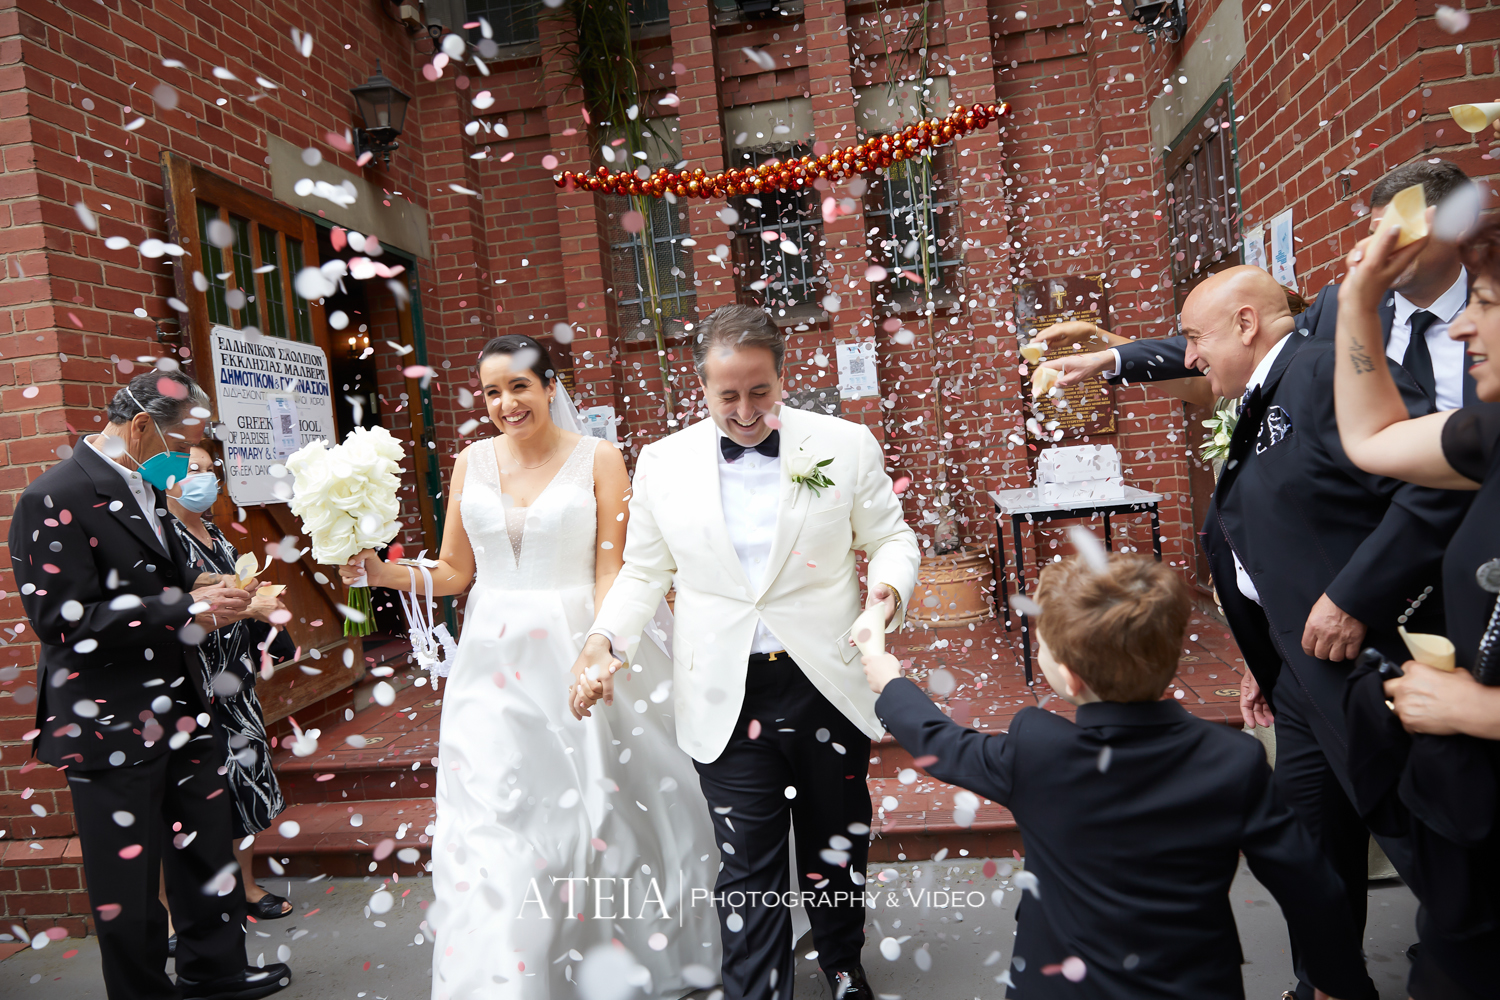 , Hellenic Museum Wedding Photography Melbourne by ATEIA Photography &#038; Video